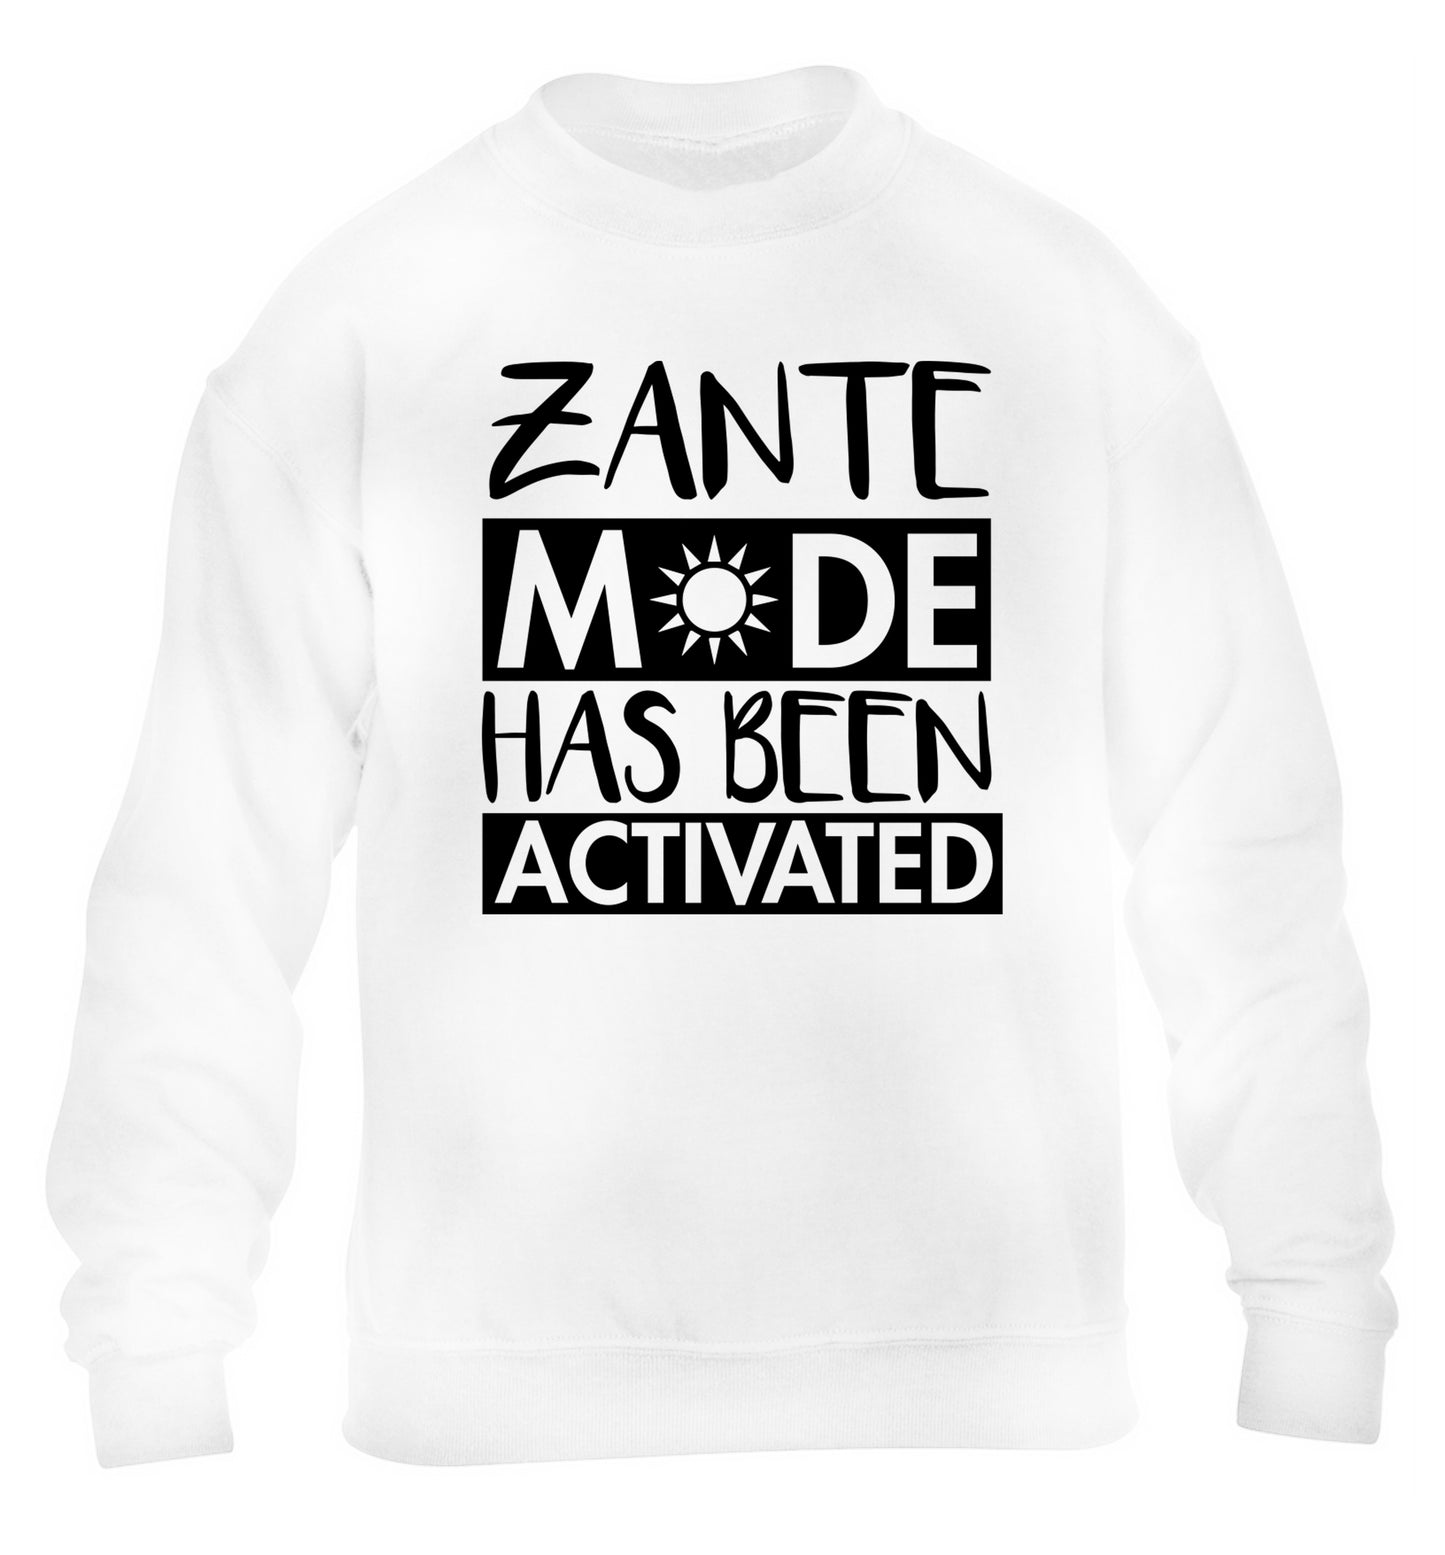 Zante mode has been activated children's white sweater 12-13 Years